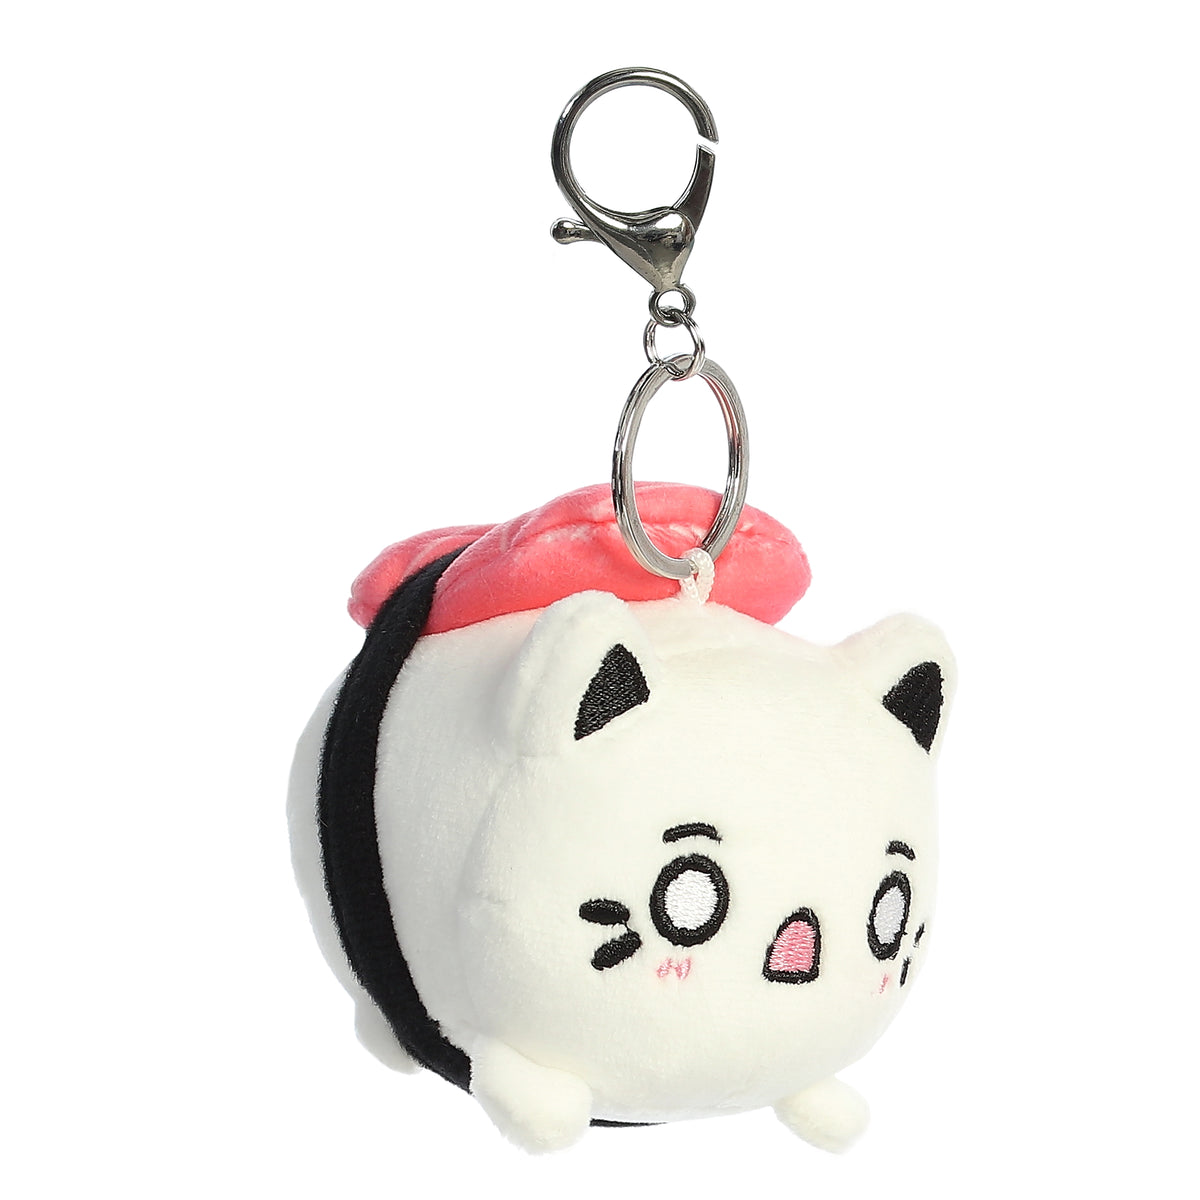 A white Meowchi cat clip-on made to resemble a sushi roll with a pink slice of tuna and a surprised animated expression.